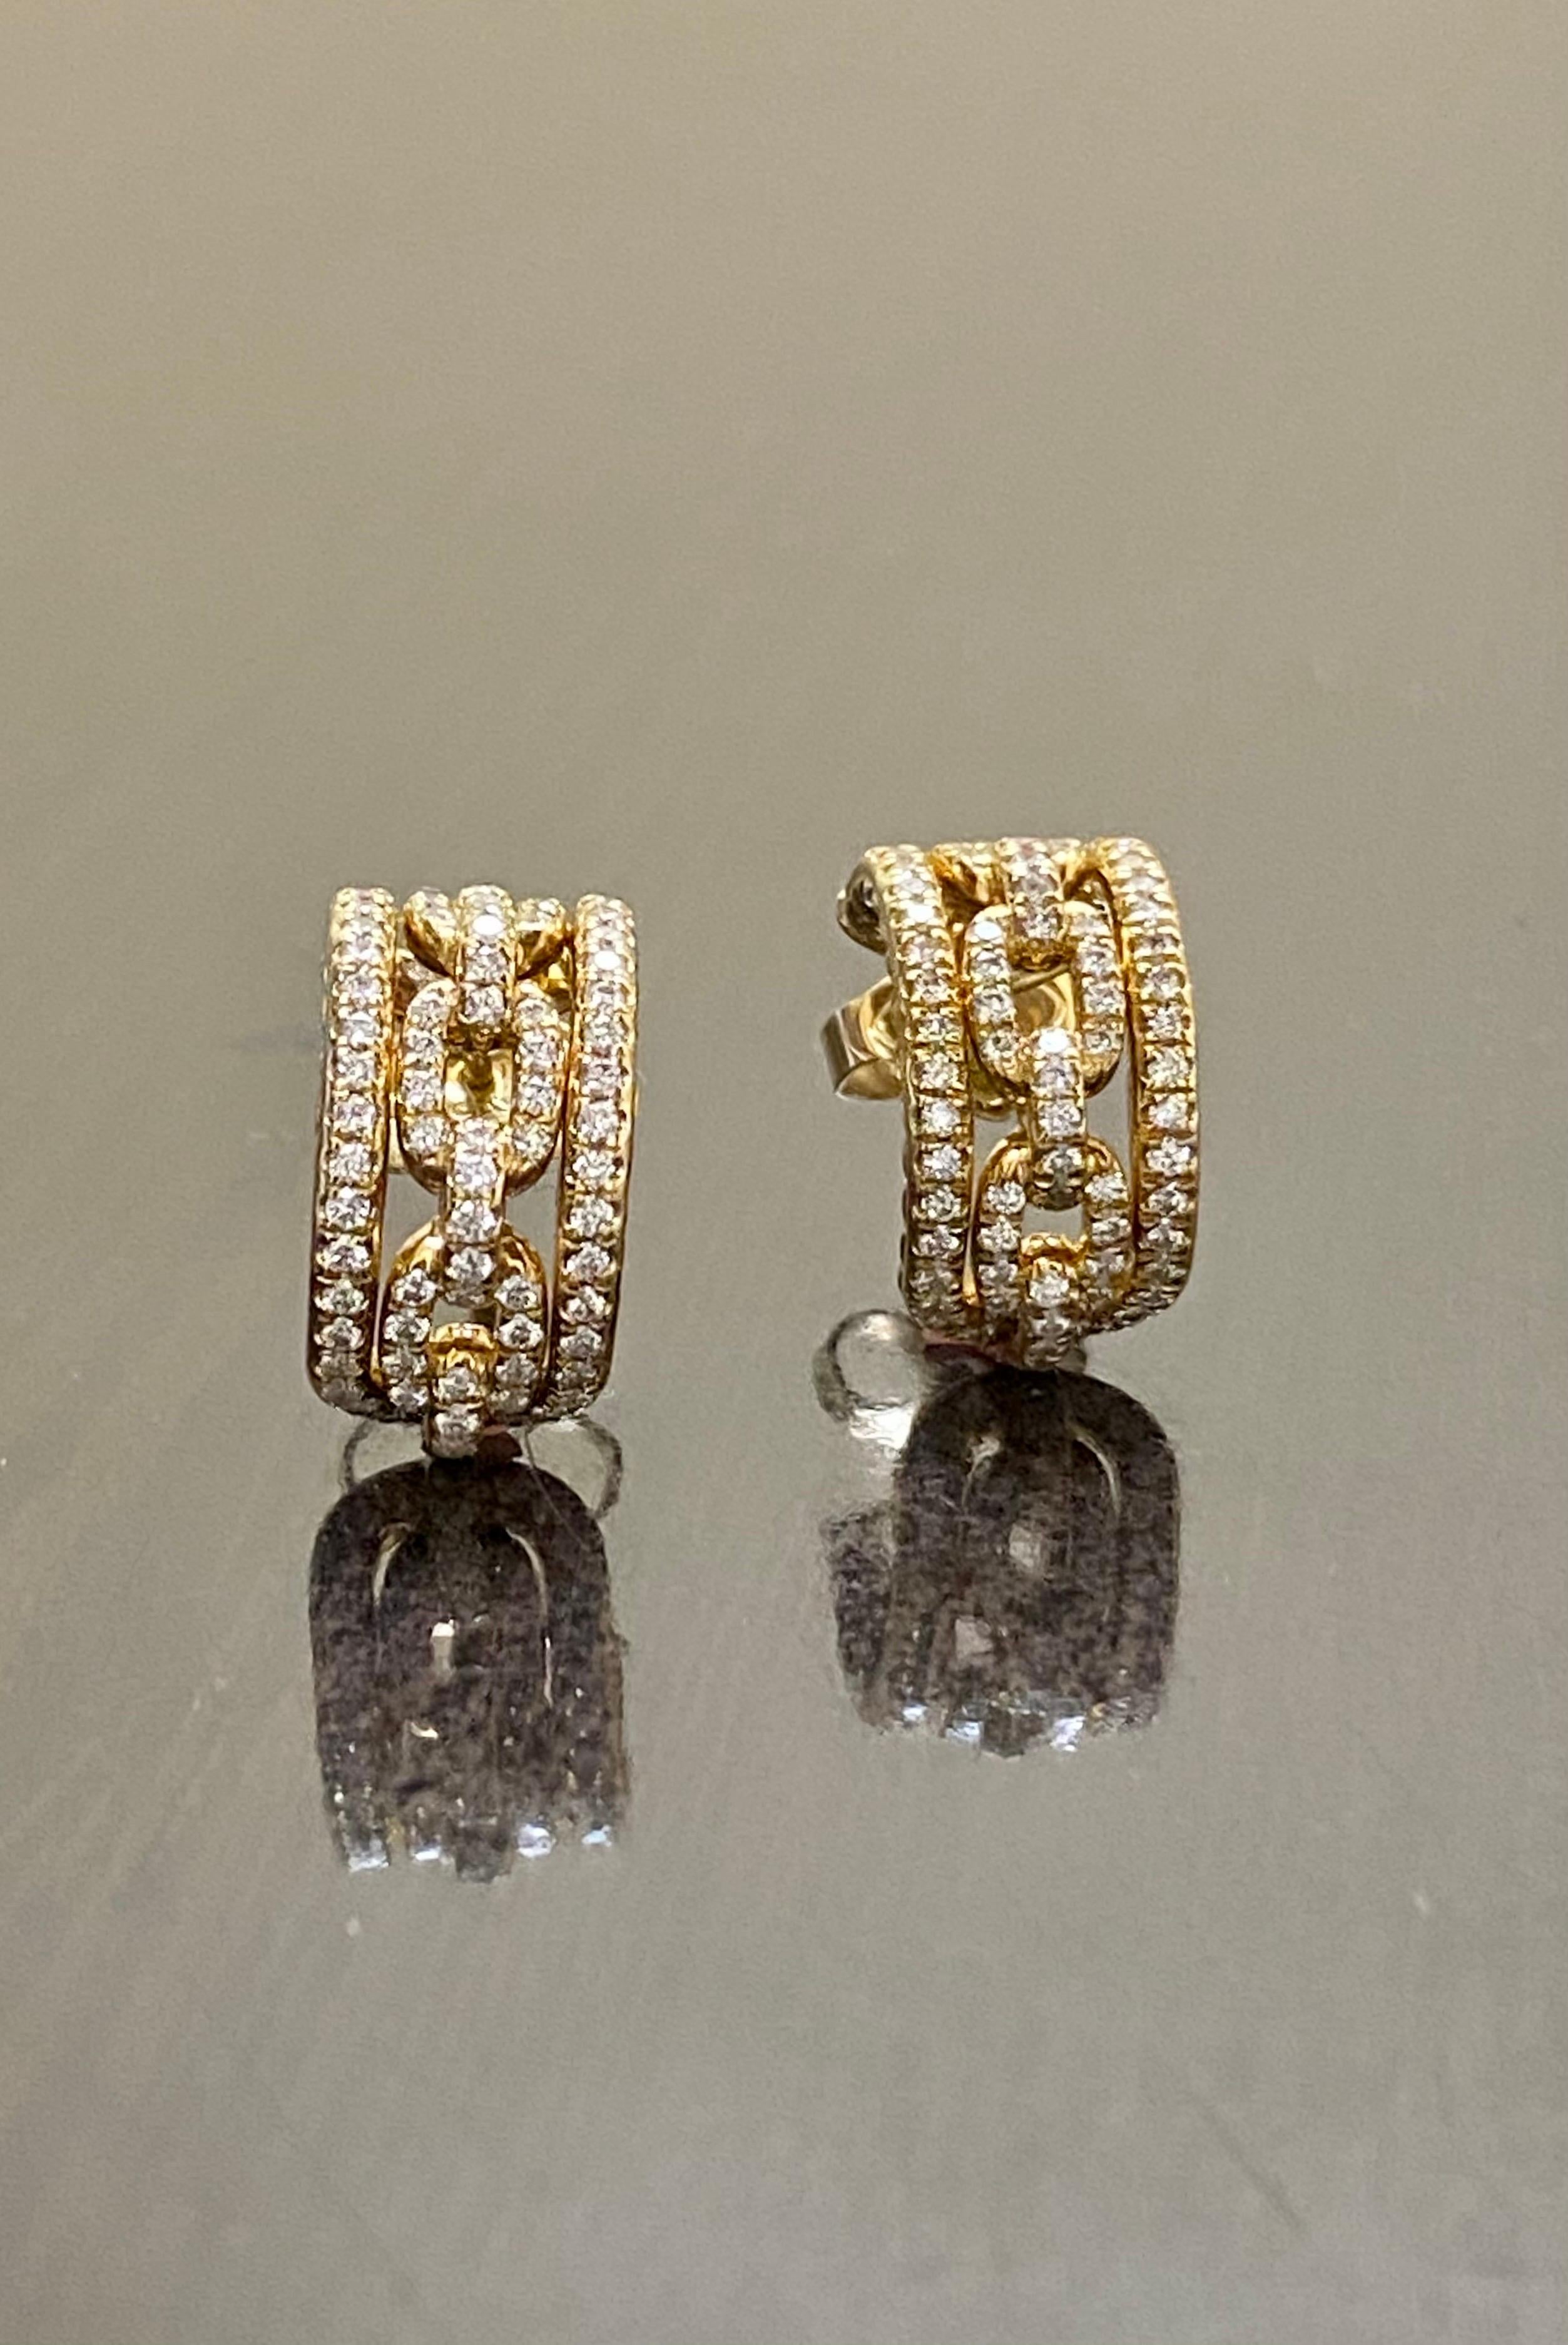 DeKara Design Designer Collection 

Metal-18K Yellow Gold, .750.

Stones- 164 Round Diamonds G Color VS2 Clarity 0.84 Carats.

Authentic David Yurman Pave Diamond Huggie Earrings Created in 18K Yellow Gold From the Stax Chain Link Collection.  Each